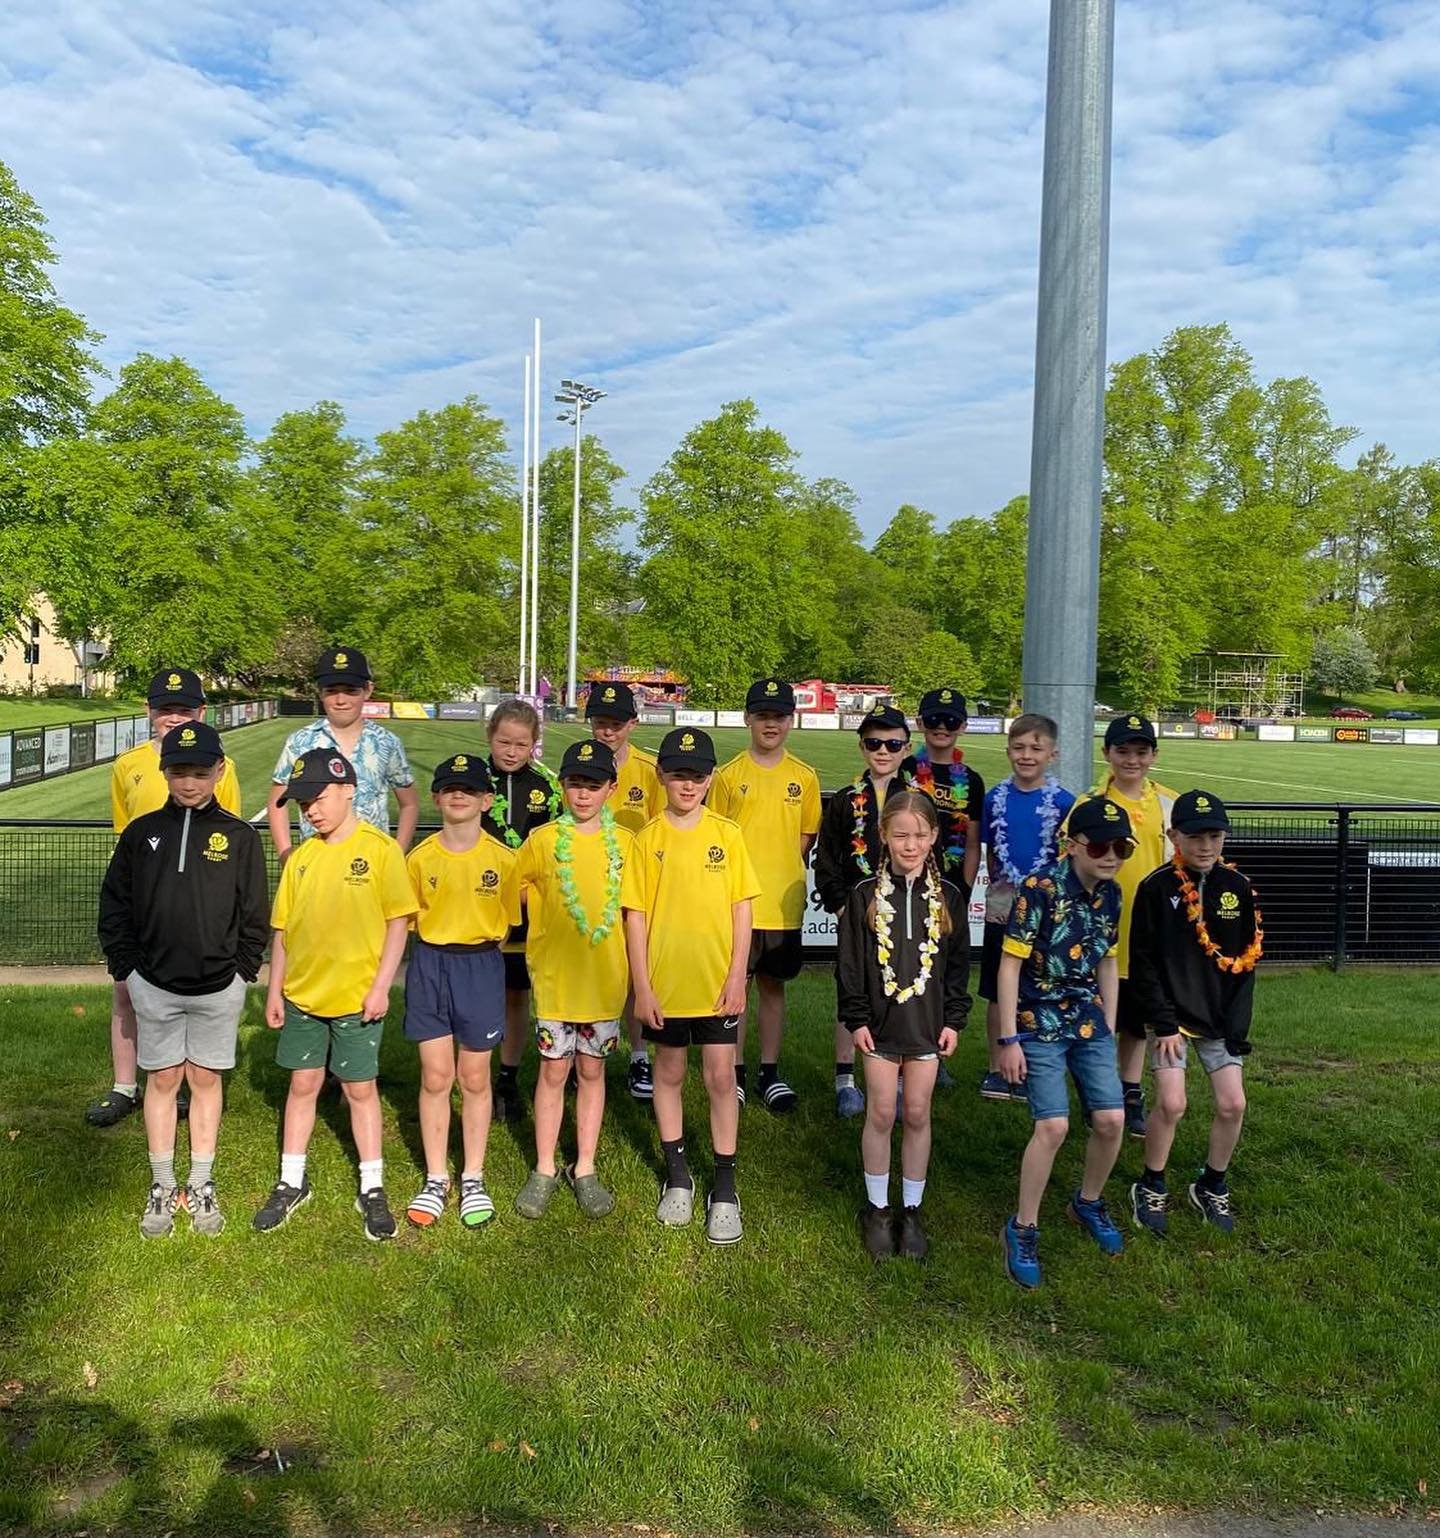 Melrose Rugby P4s headed to Morpeth RFC on Saturday morning and stayed for the weekend. 

A trip to the beach followed by an afternoon at Morpeth U18s 7s tournament were very enjoyable. On Saturday night we were hosted at Morpeth Cricket Club for a d